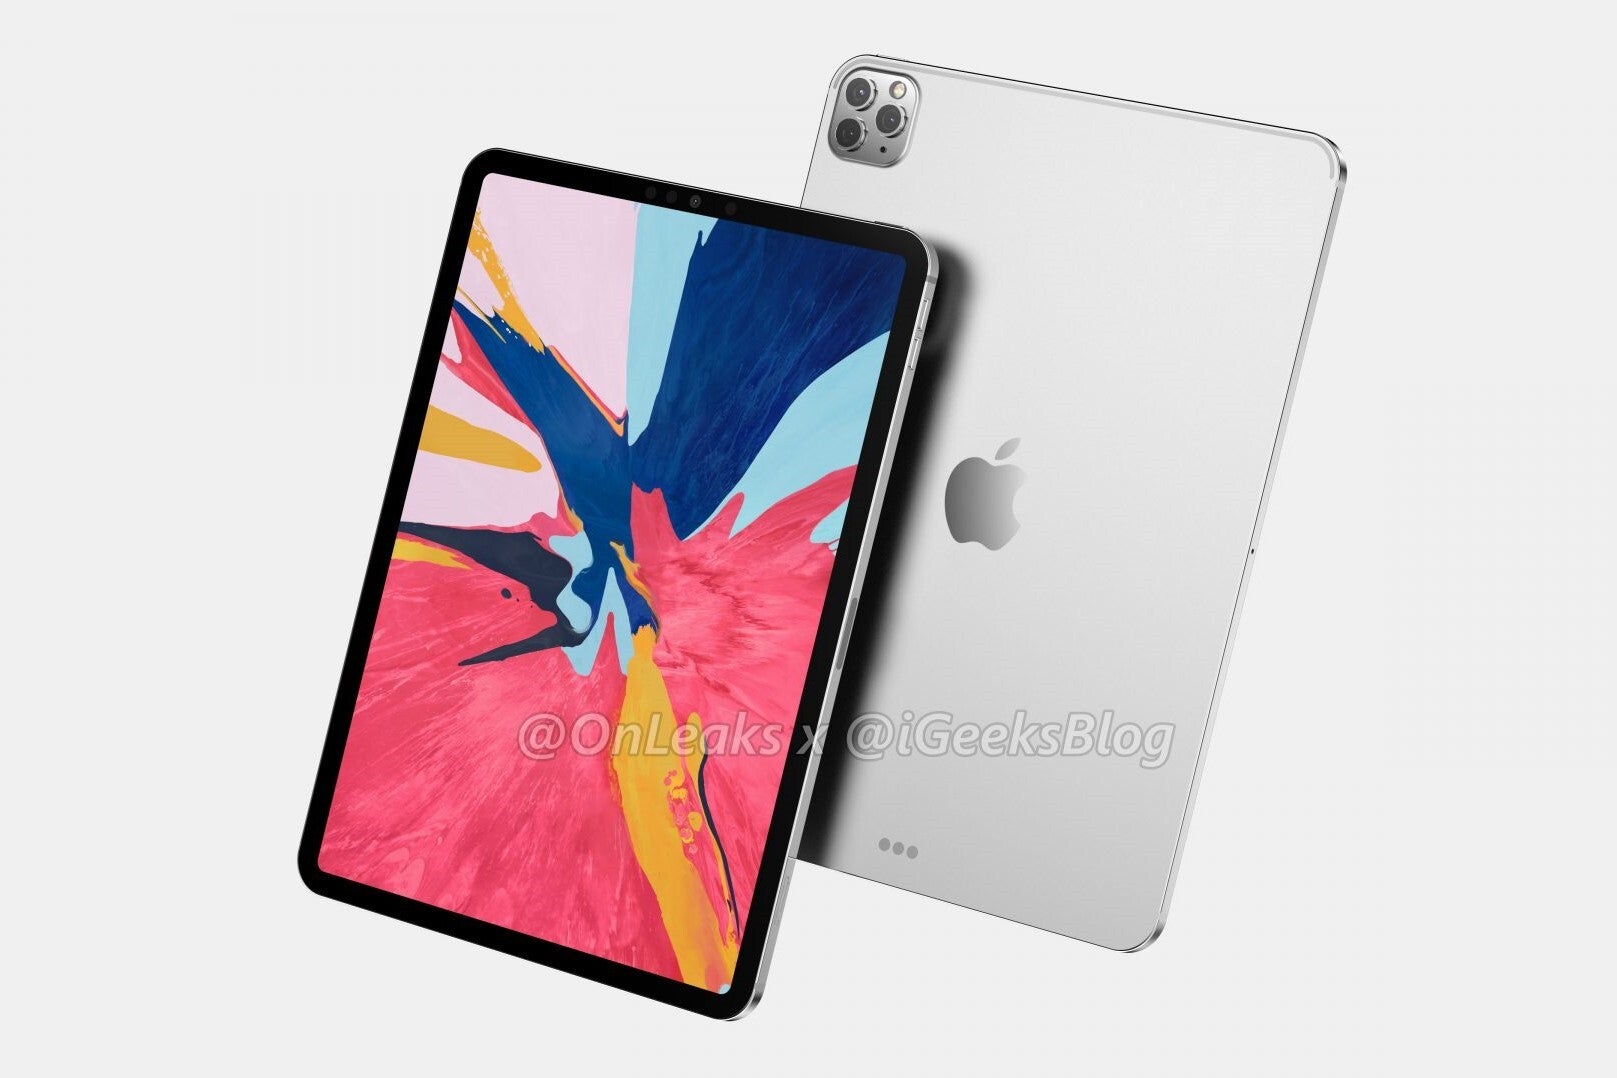 2020 iPad Pro CAD-based render - Apple orders bucketloads of iPhone 9 units as device enters trial production